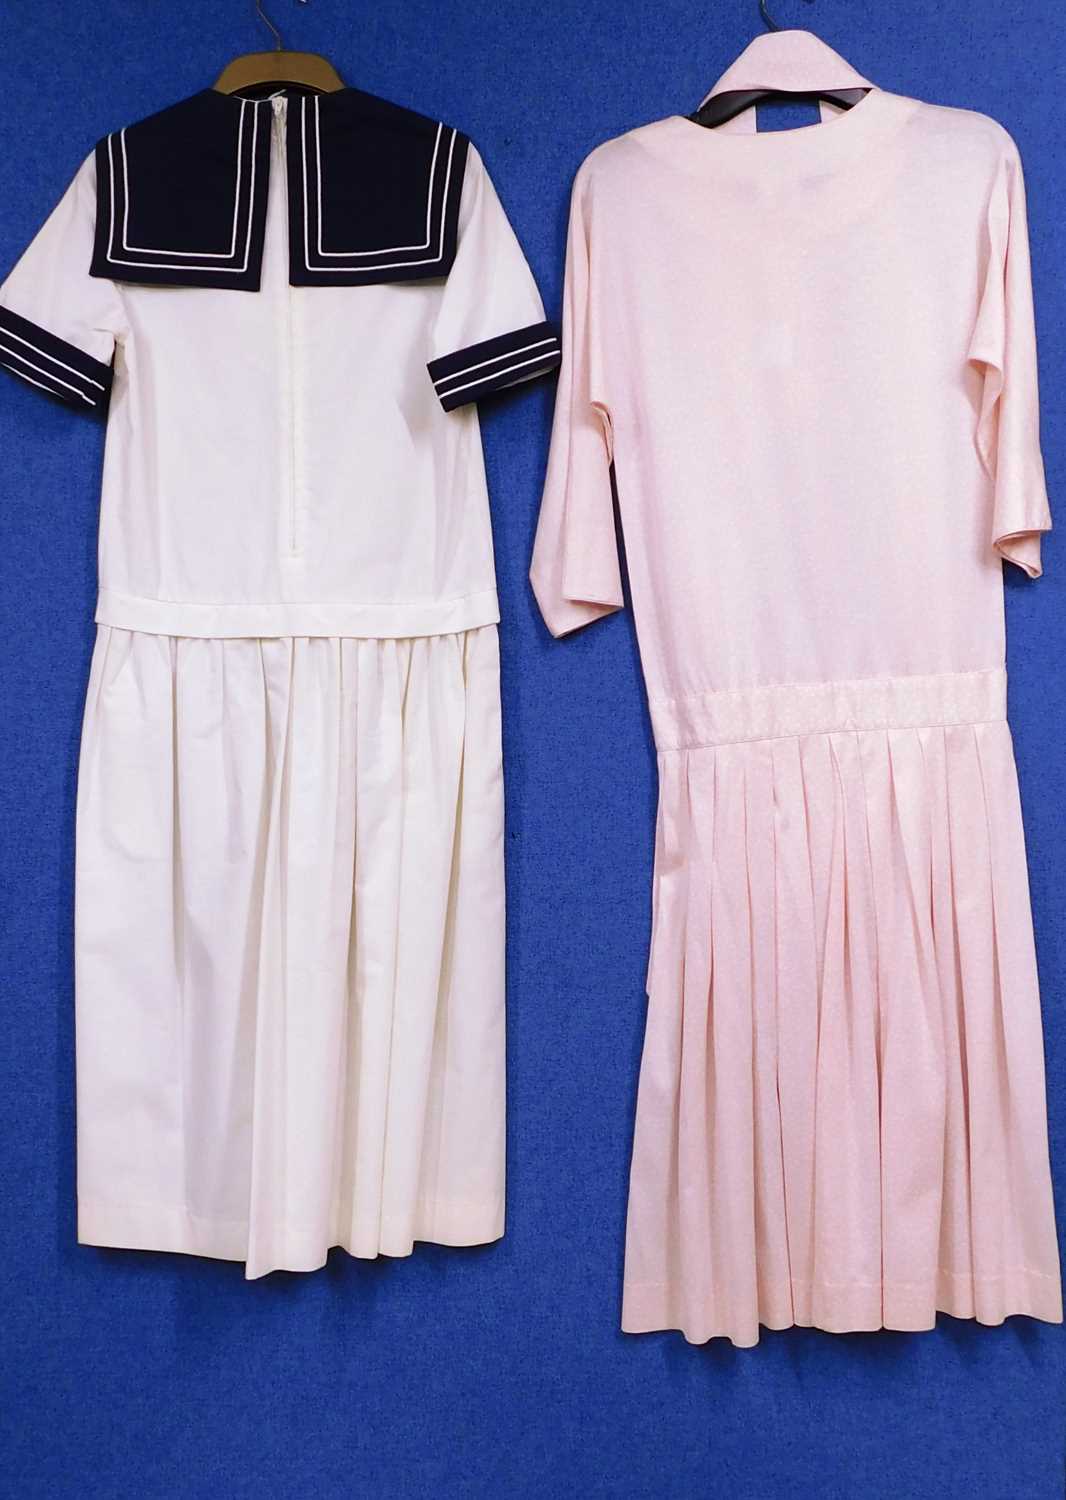 Two Laura Ashley dresses to include a cream and navy blue sailor dress and a pink and white - Image 4 of 9